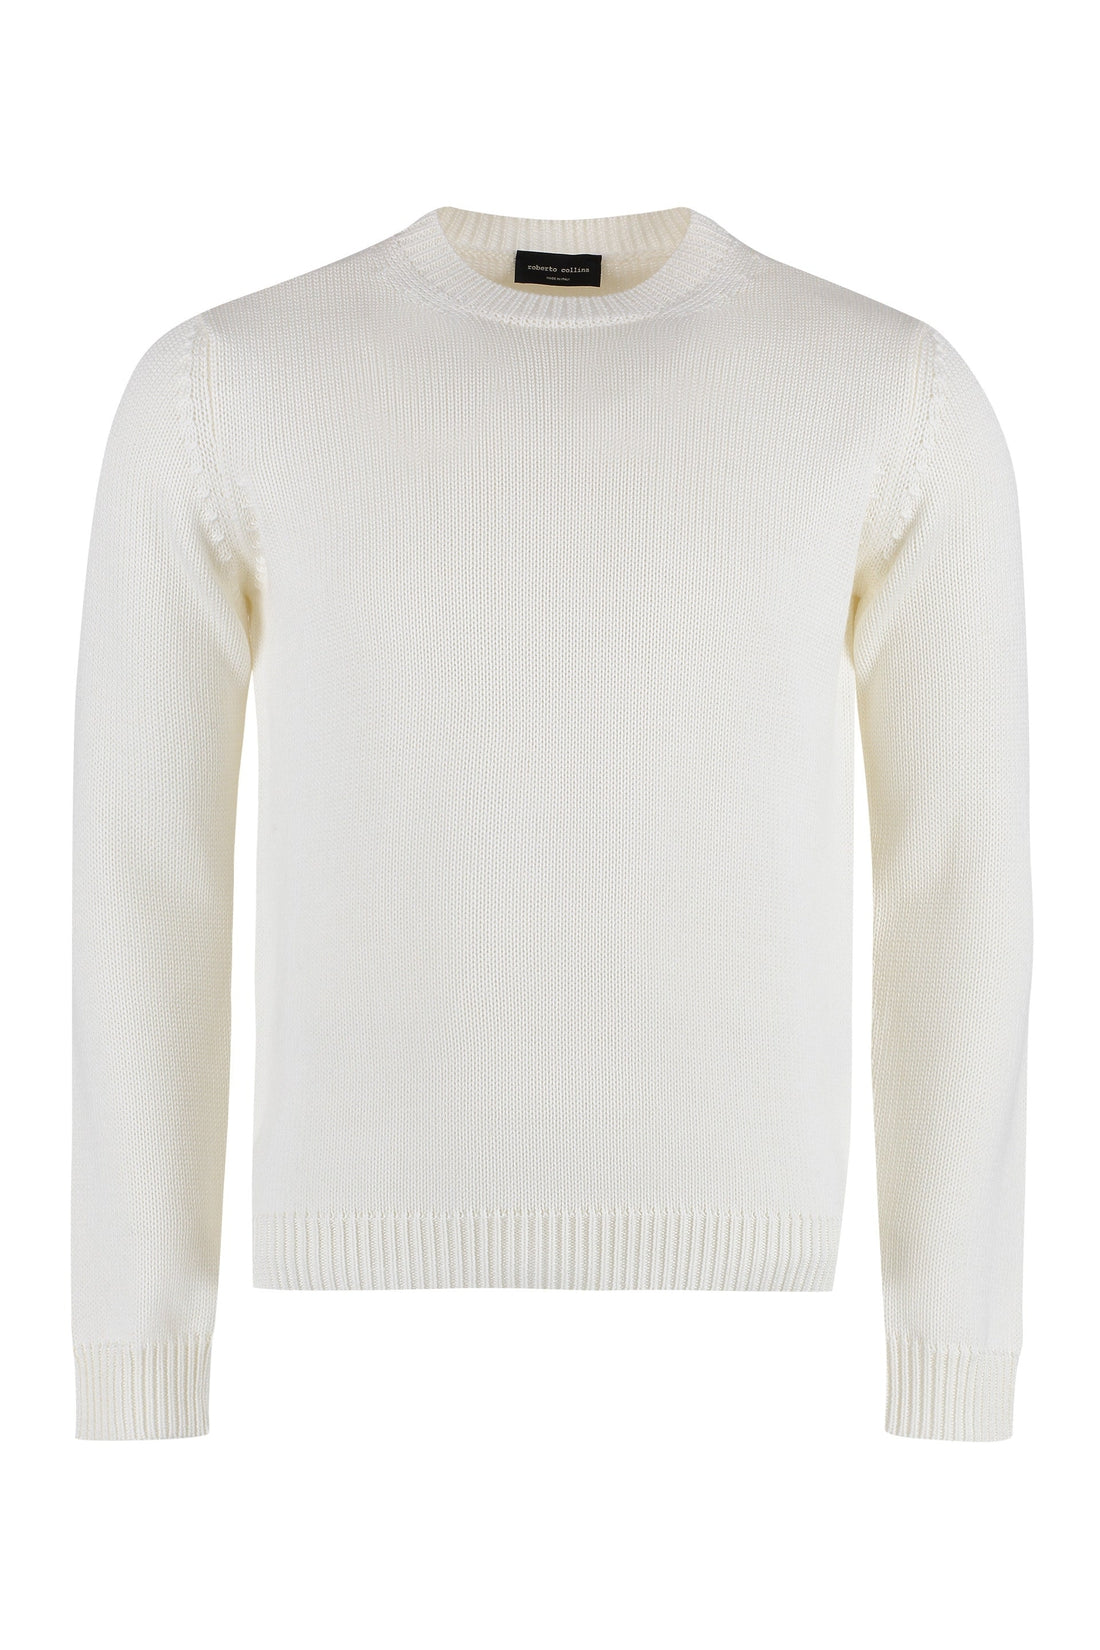 Roberto Collina-OUTLET-SALE-Crew-neck wool sweater-ARCHIVIST